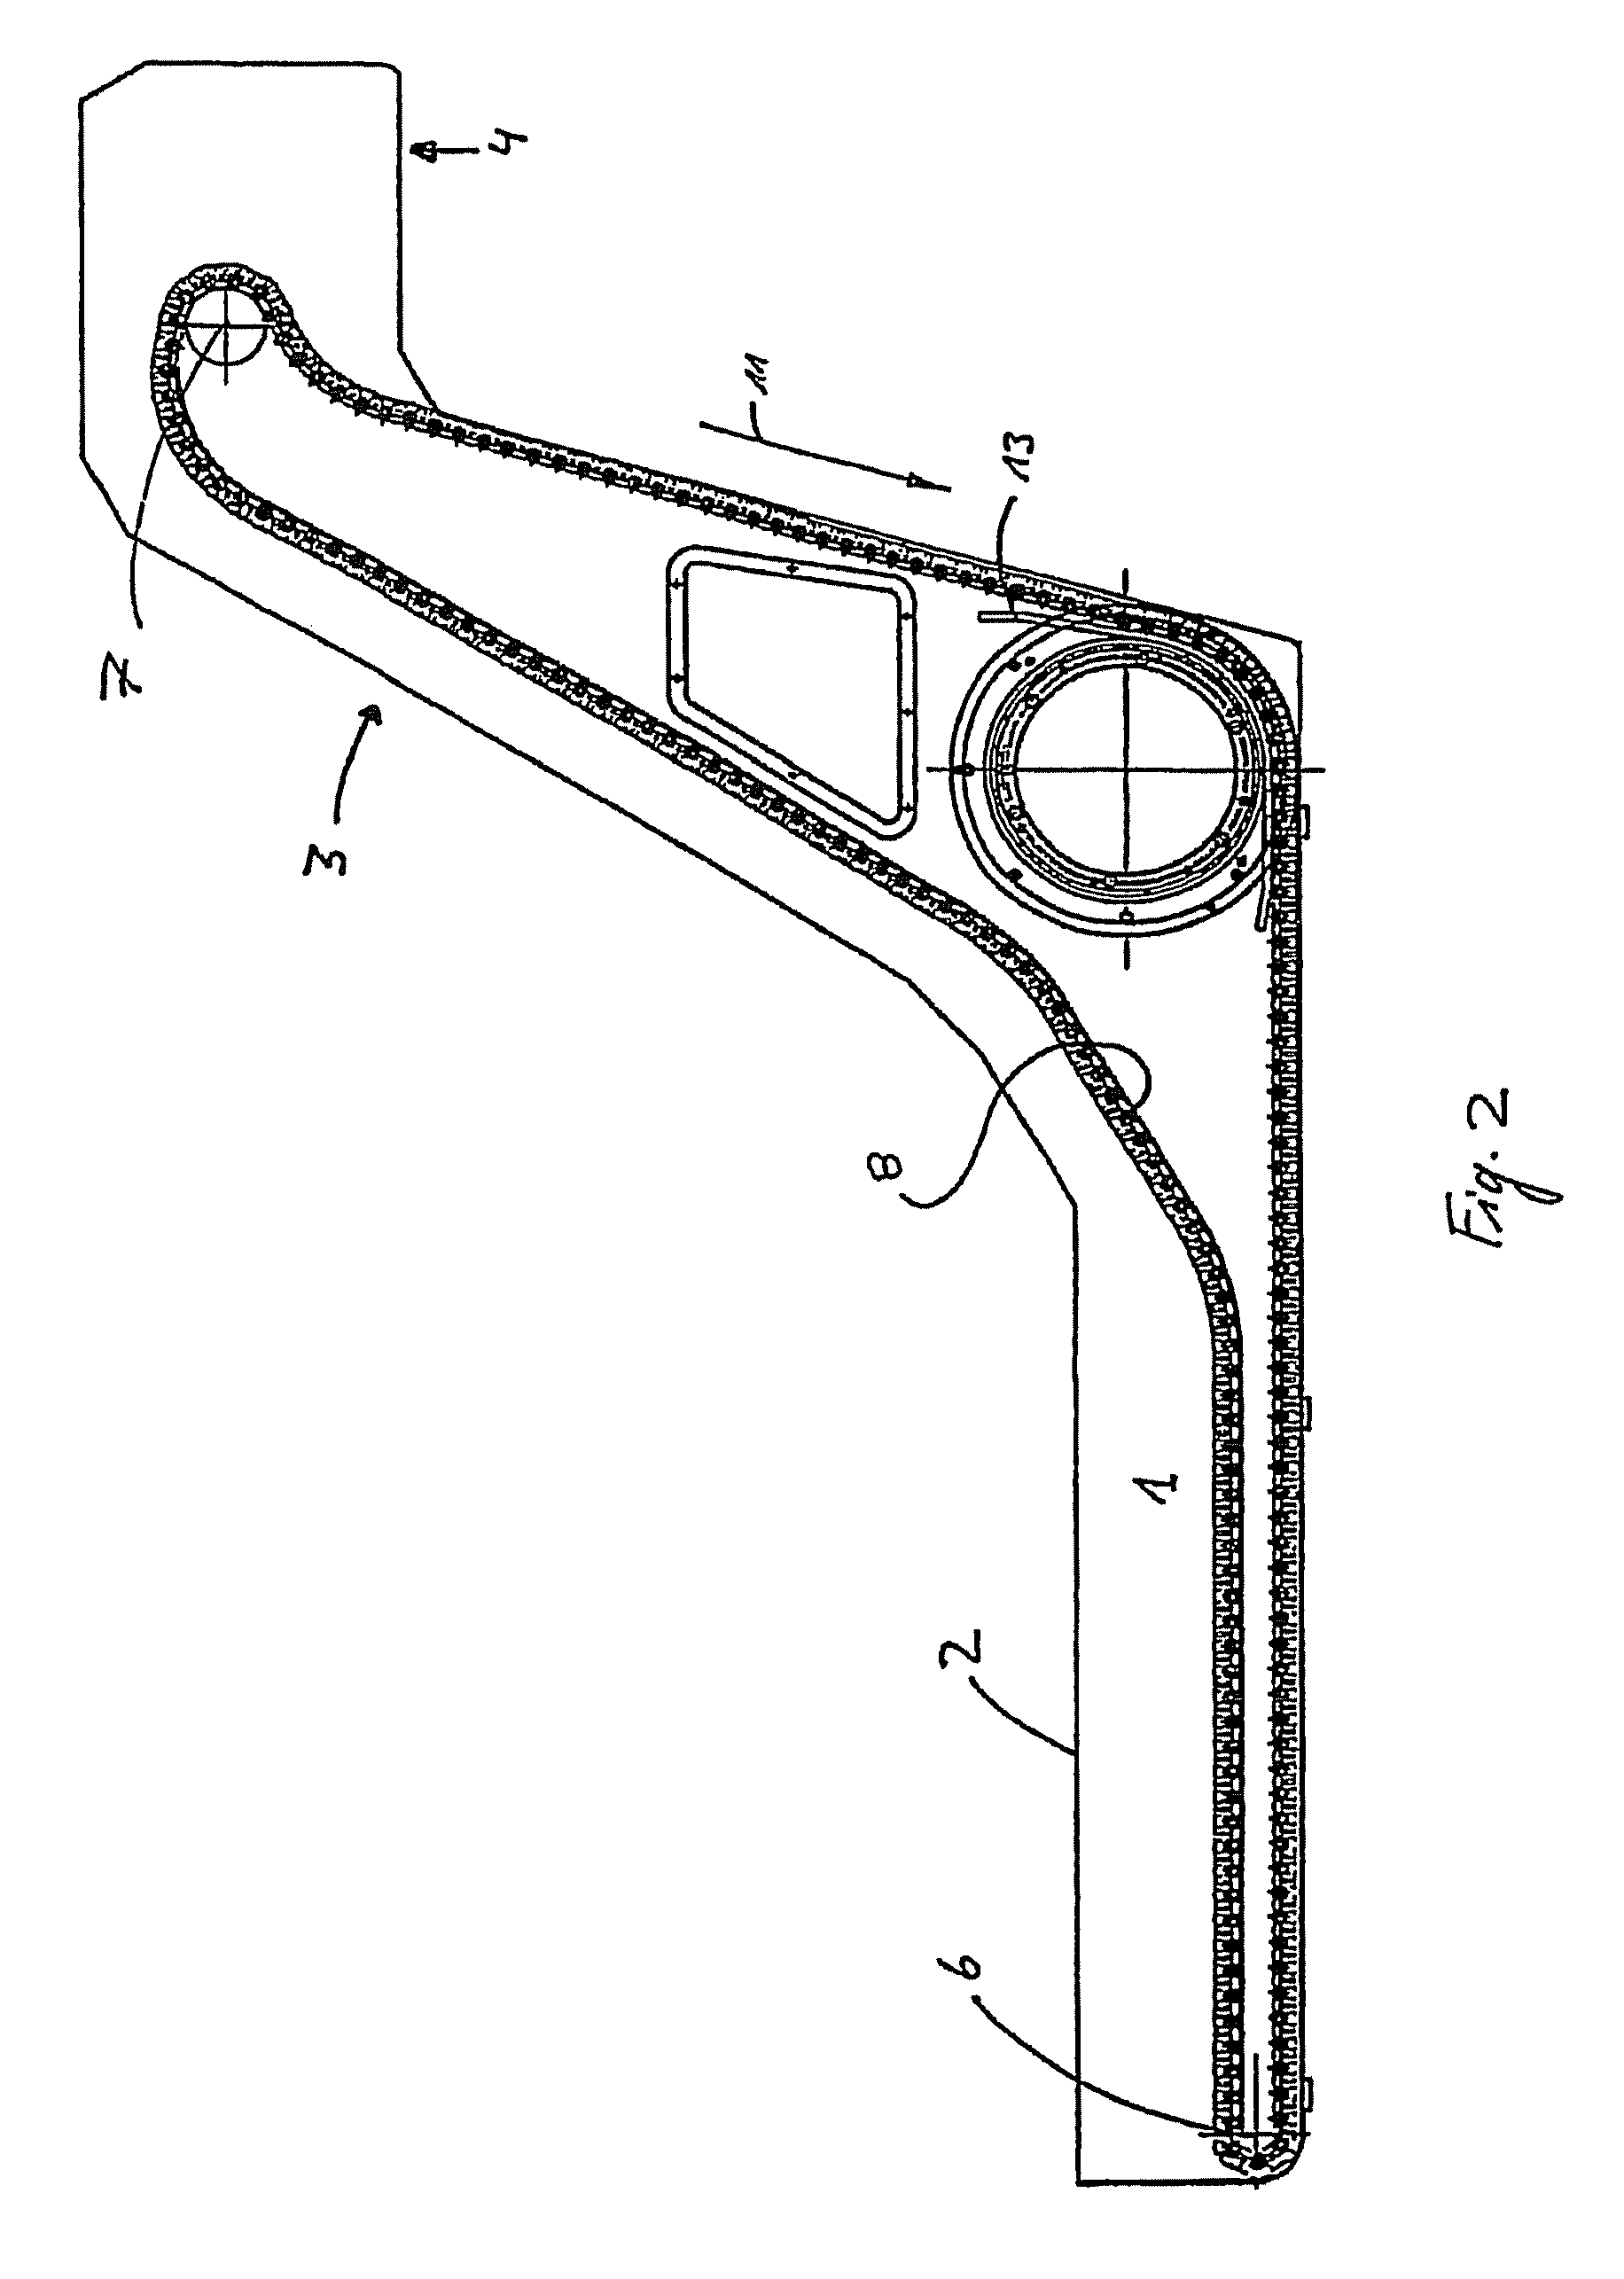 Device for receiving and separating chips and cooling liquid discharged from machine tools (drive)